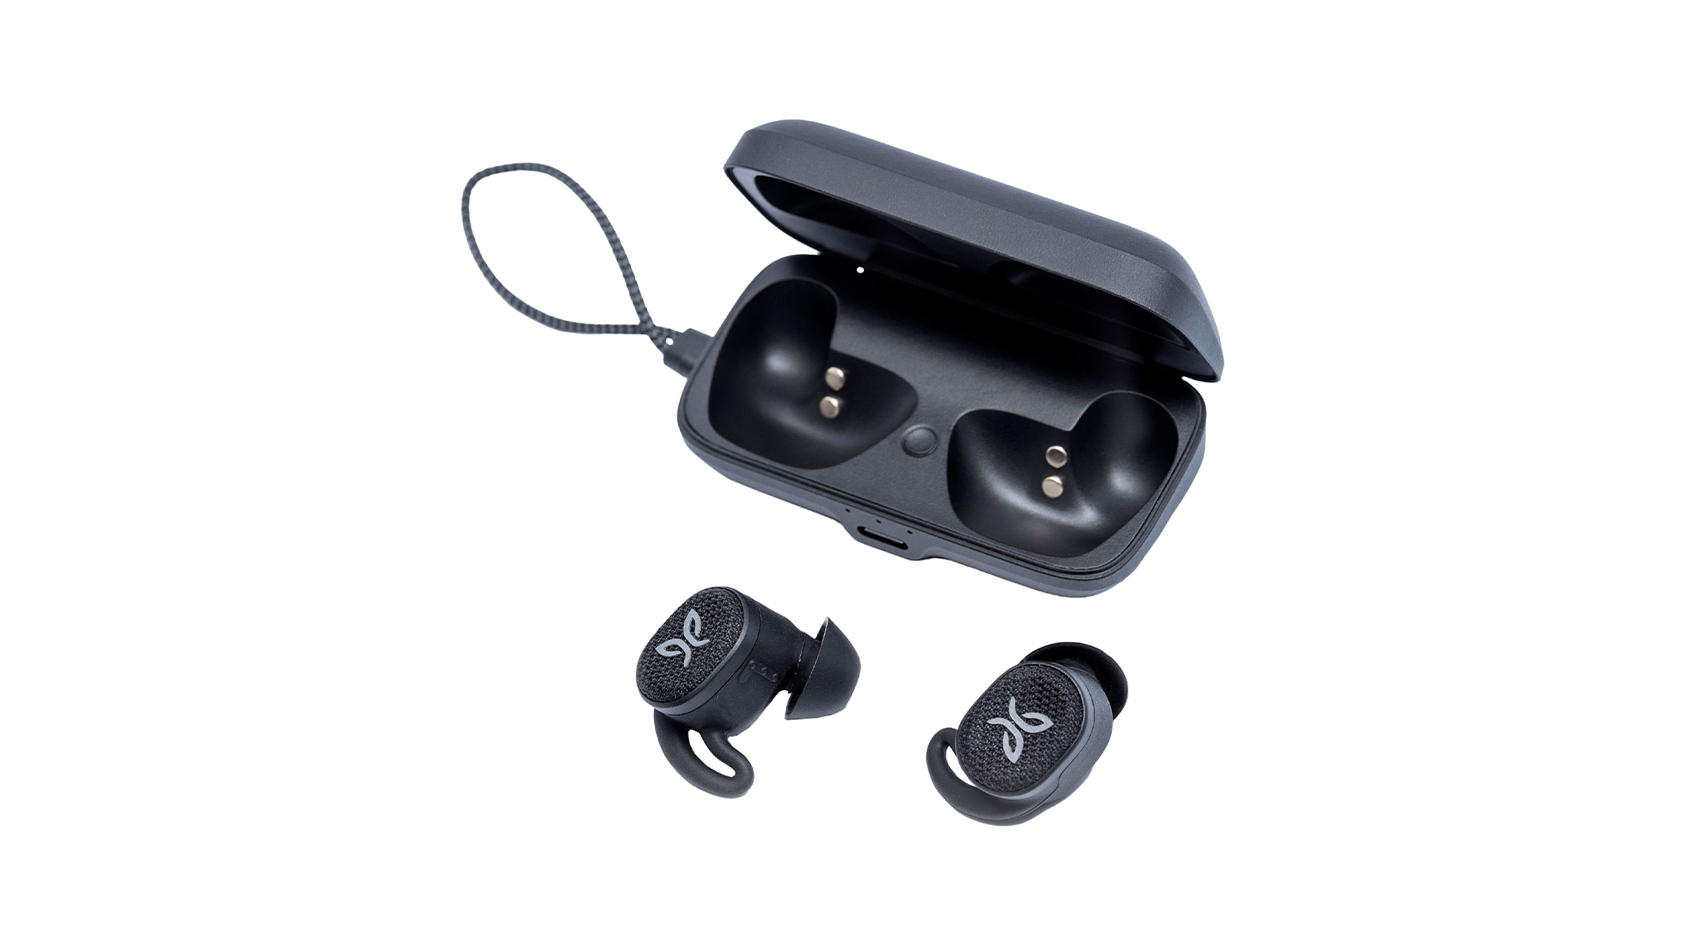 The Jaybird Vista 2 workout earbuds and open case against a white background.